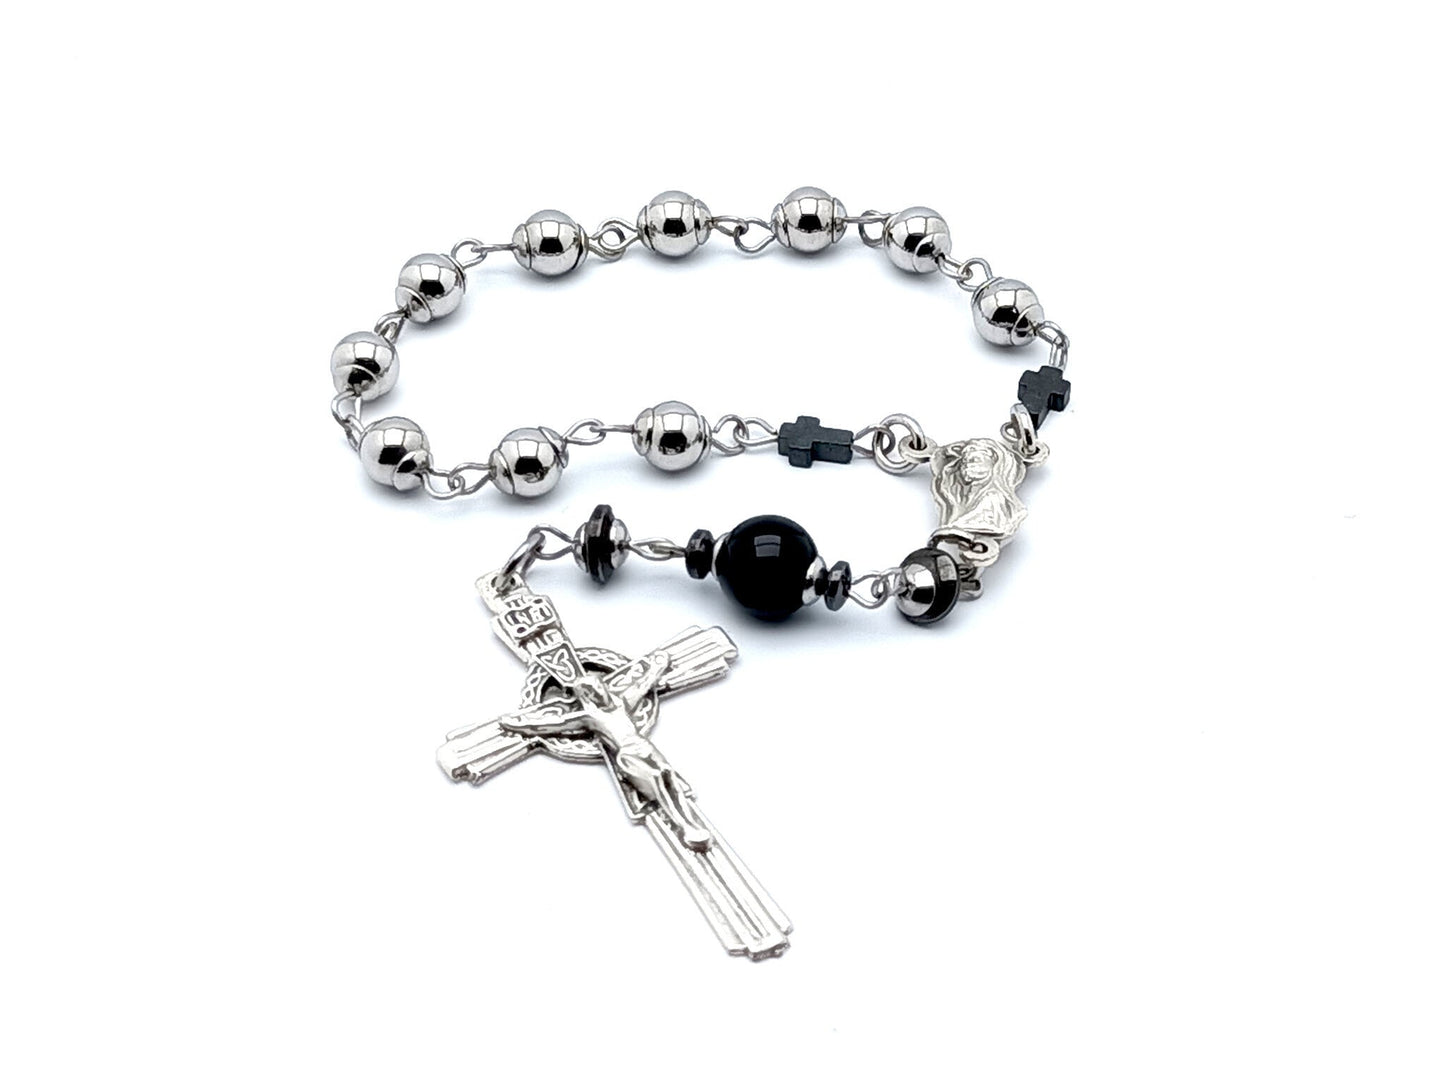 Crown of Thorns unqiue rosary beads single decade rosary with stainless steel and hematite beads, silver Crown of Thorns crucifix and centre medal.